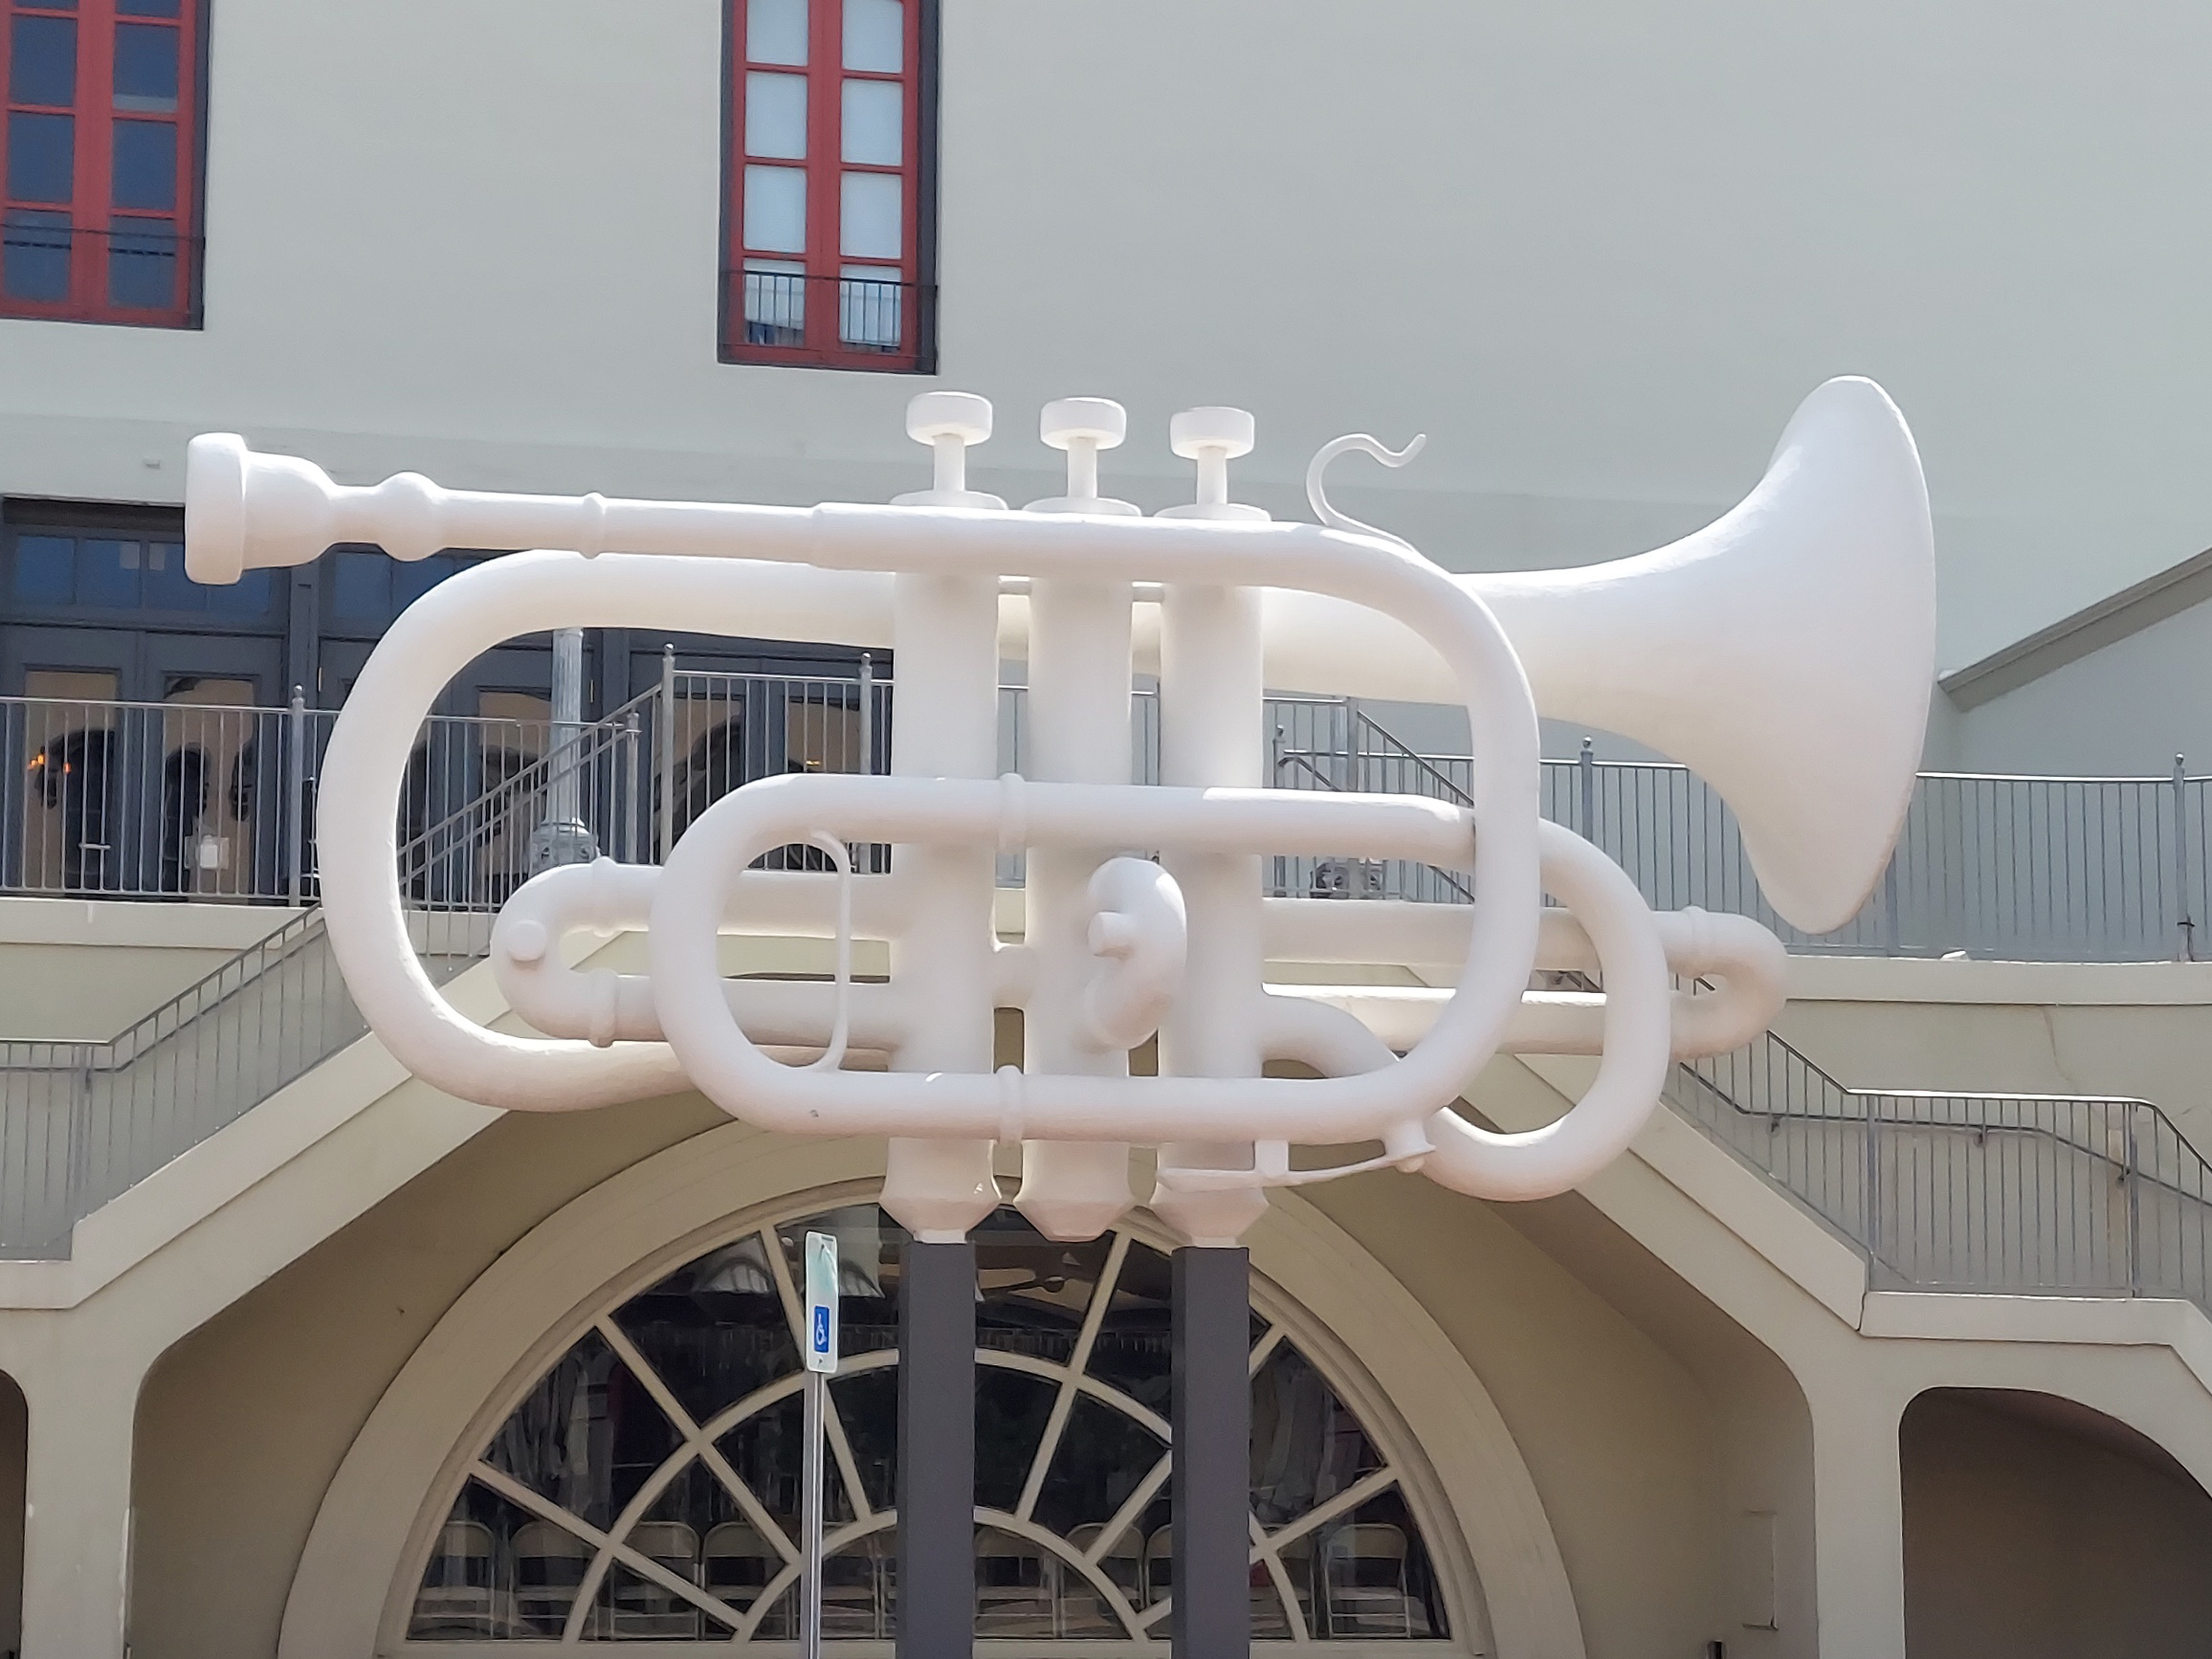 Grandeur in Iron: The Giant Trumpet Sculpture Gracing Old Galveston Square, a Stunning Landmark.  Learn more with an historic waking tour from Galveston Tour Company